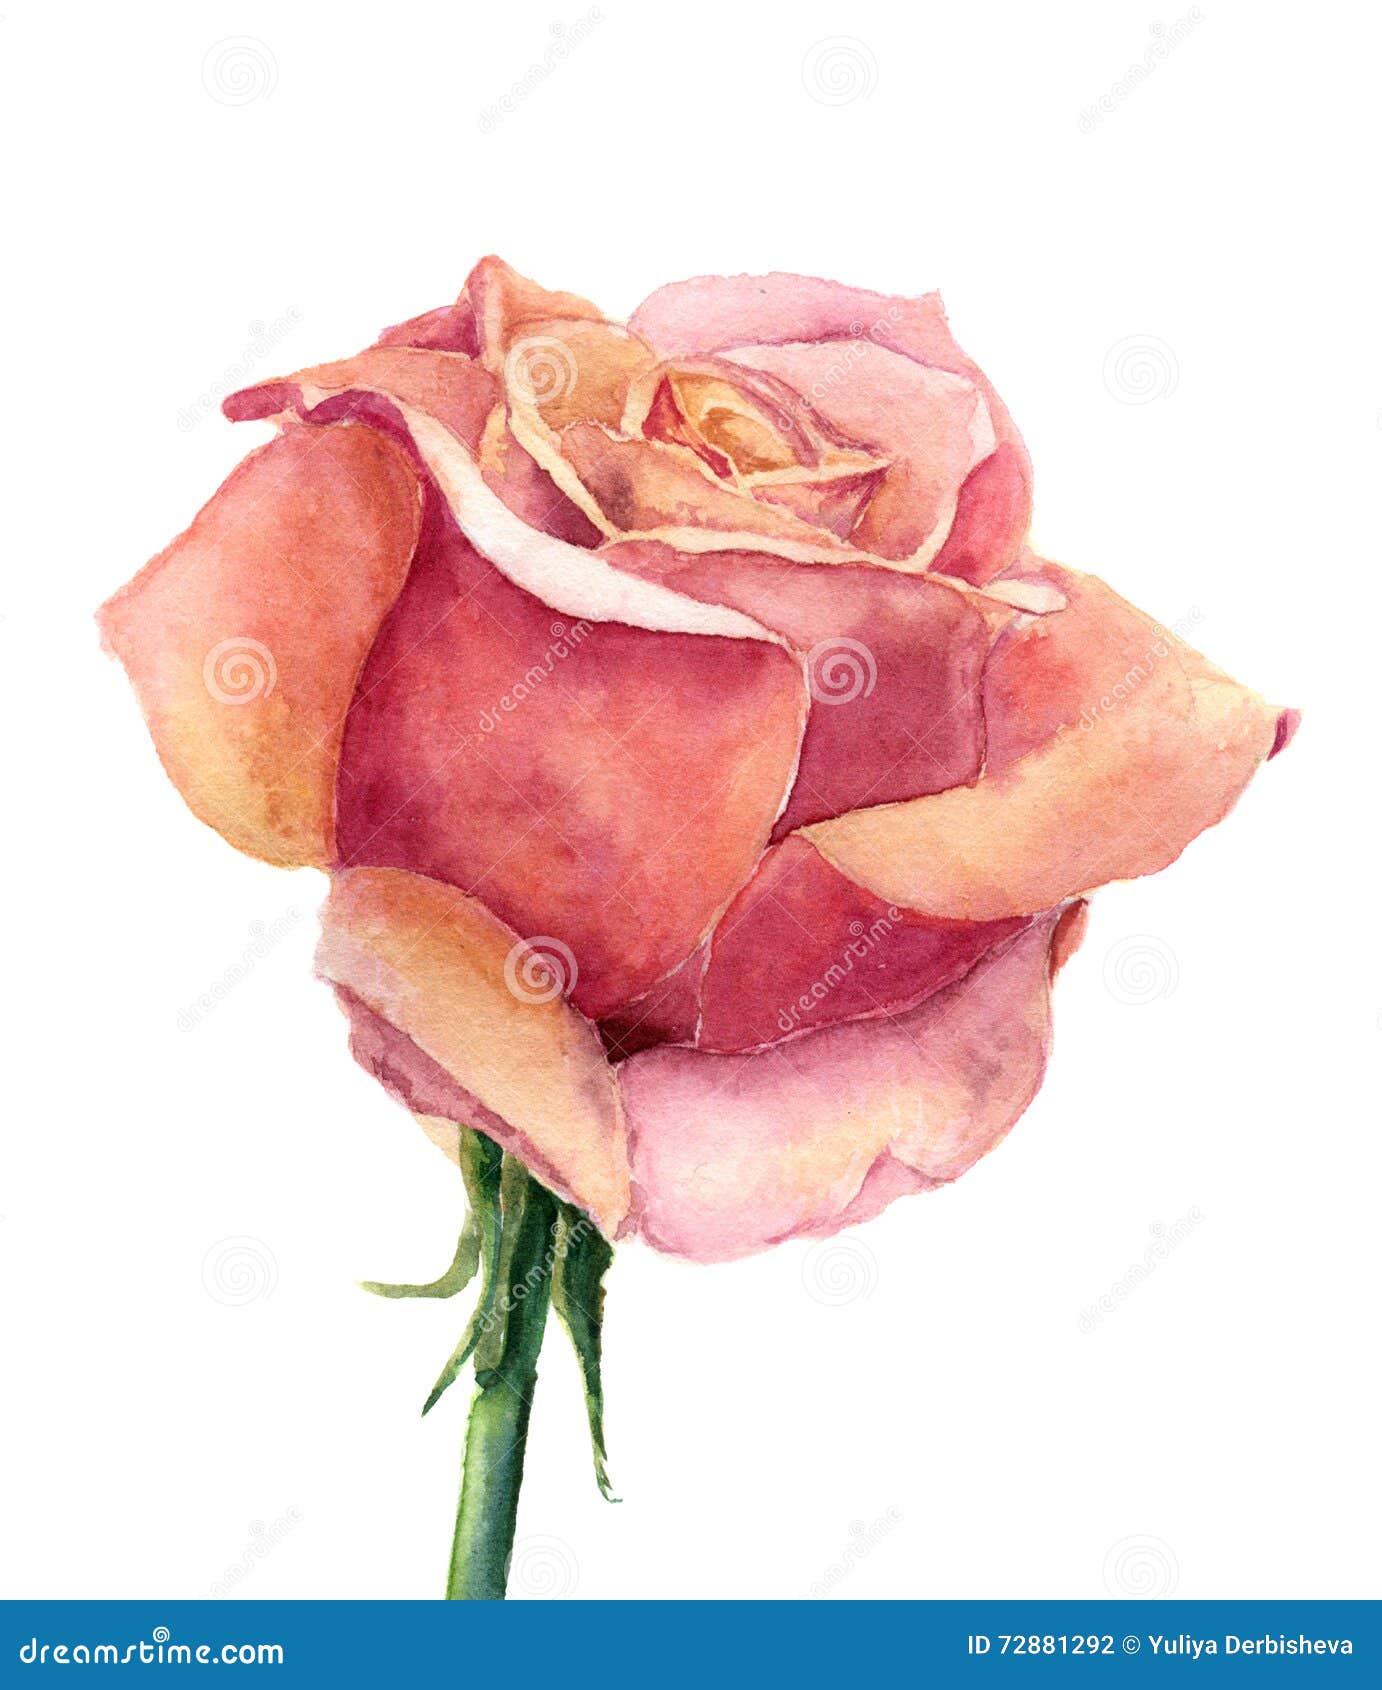 Watercolor Rose. Hand Drawn Artistic Illustration on White Background ...